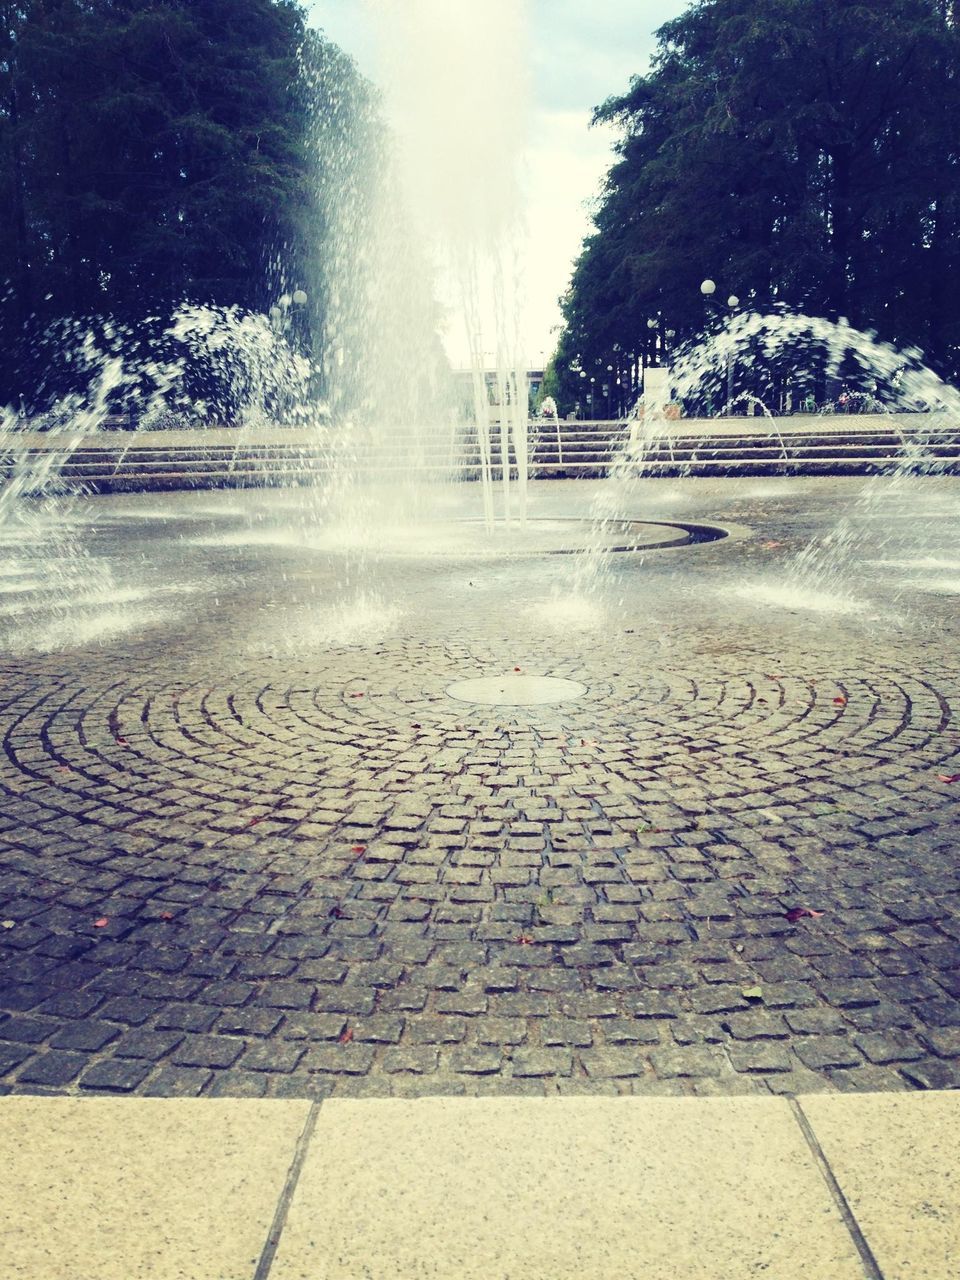 fountain, motion, built structure, building exterior, street, sunlight, day, spraying, tree, outdoors, splashing, architecture, cobblestone, water, no people, park - man made space, road, incidental people, footpath, steps